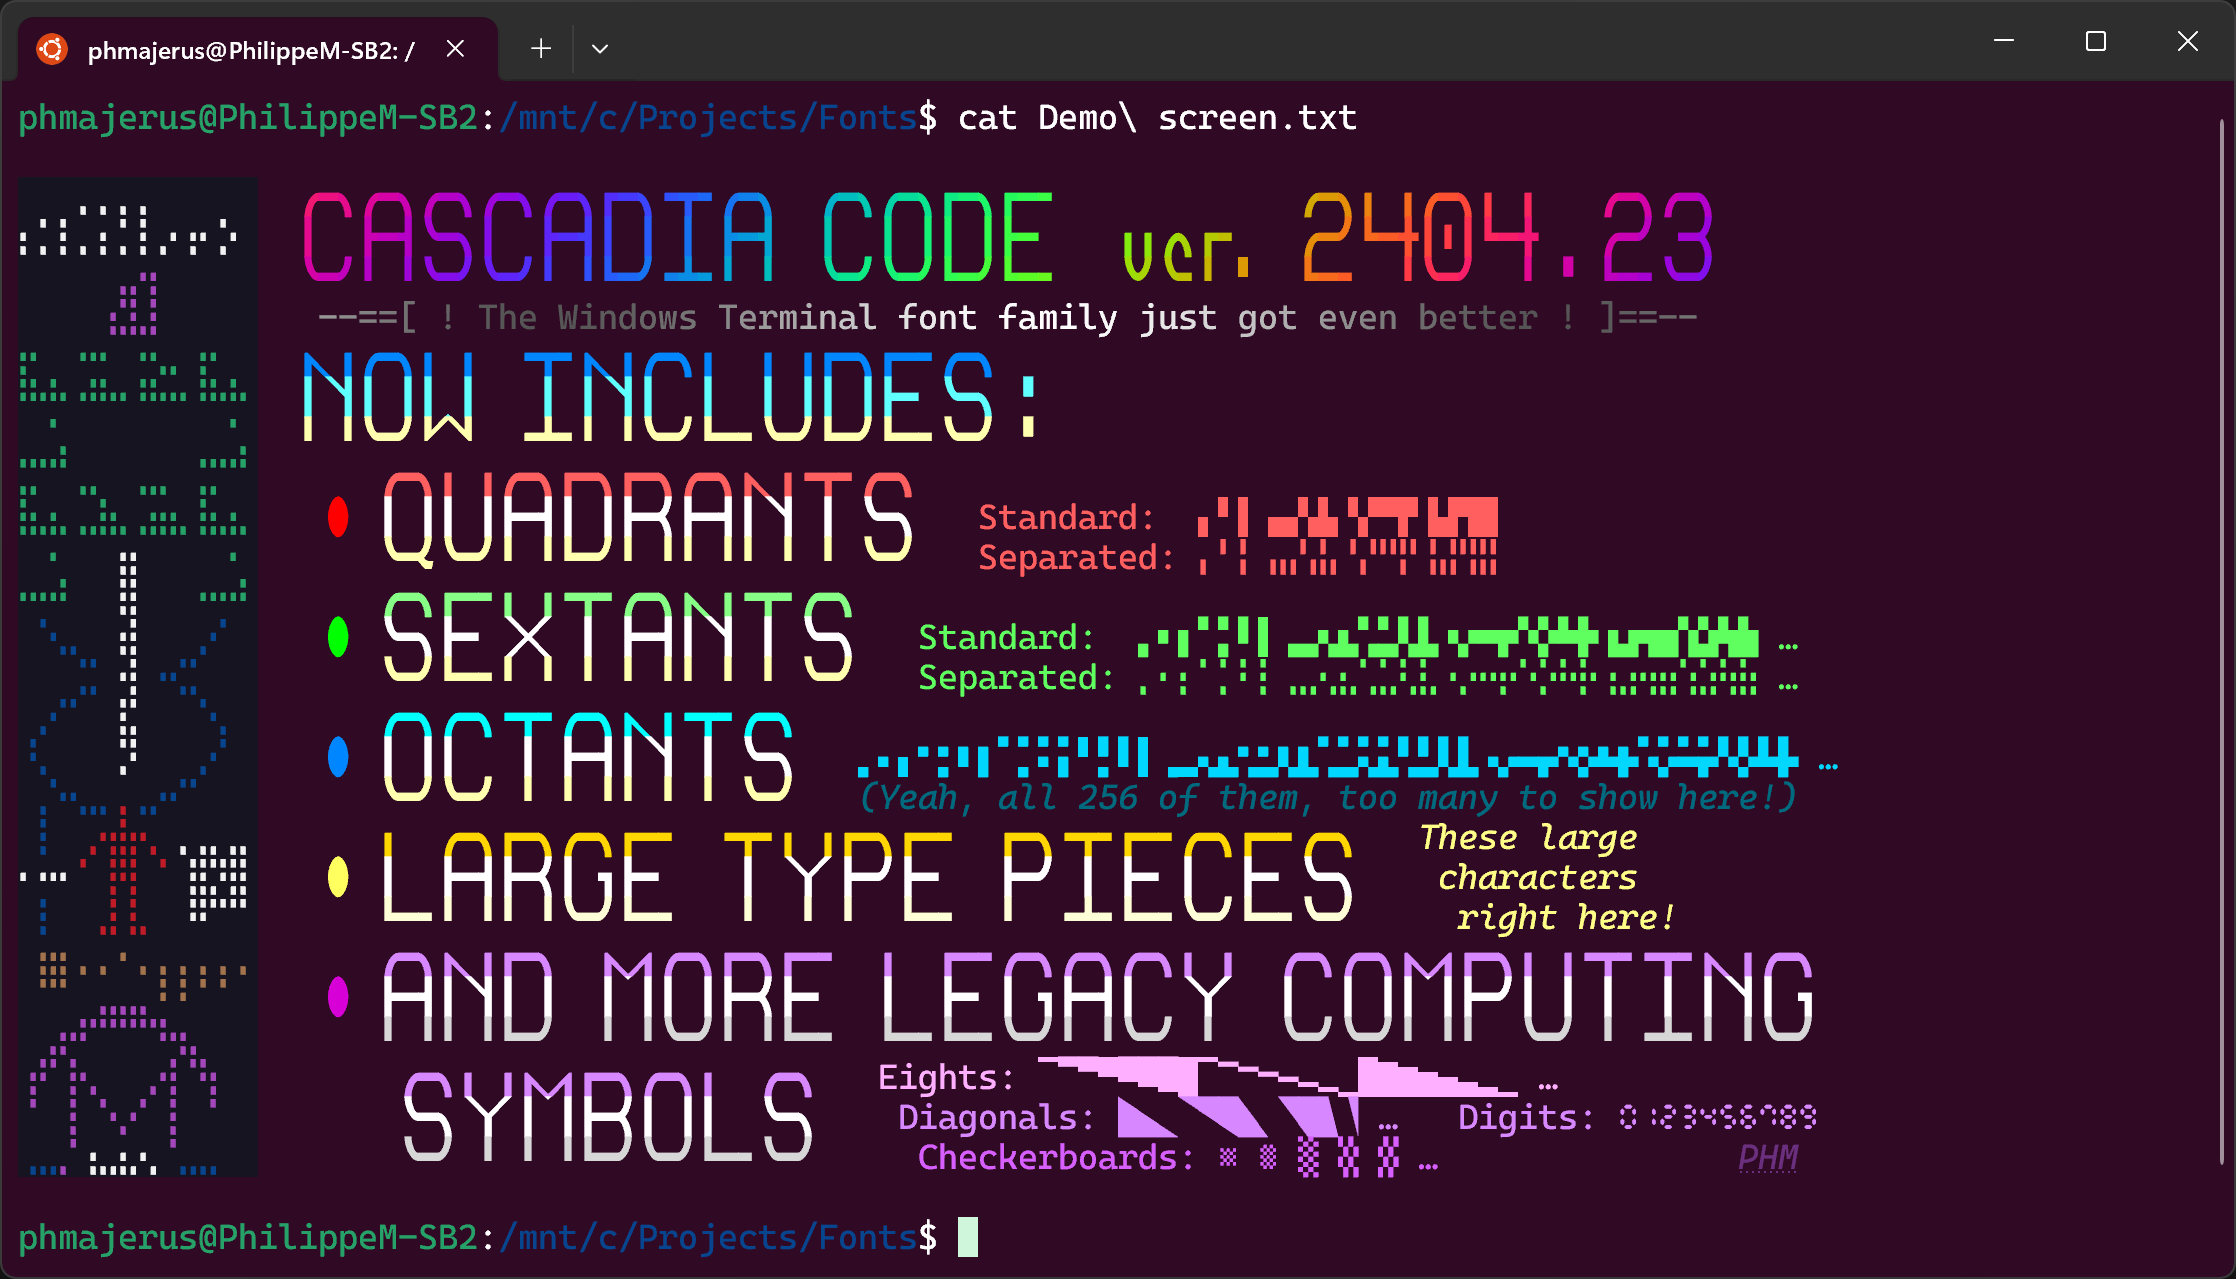 Hello world! We are excited to announce the first major version update of Cascadia Code since the 2111.01 release three years ago! (Wow, time sure fli